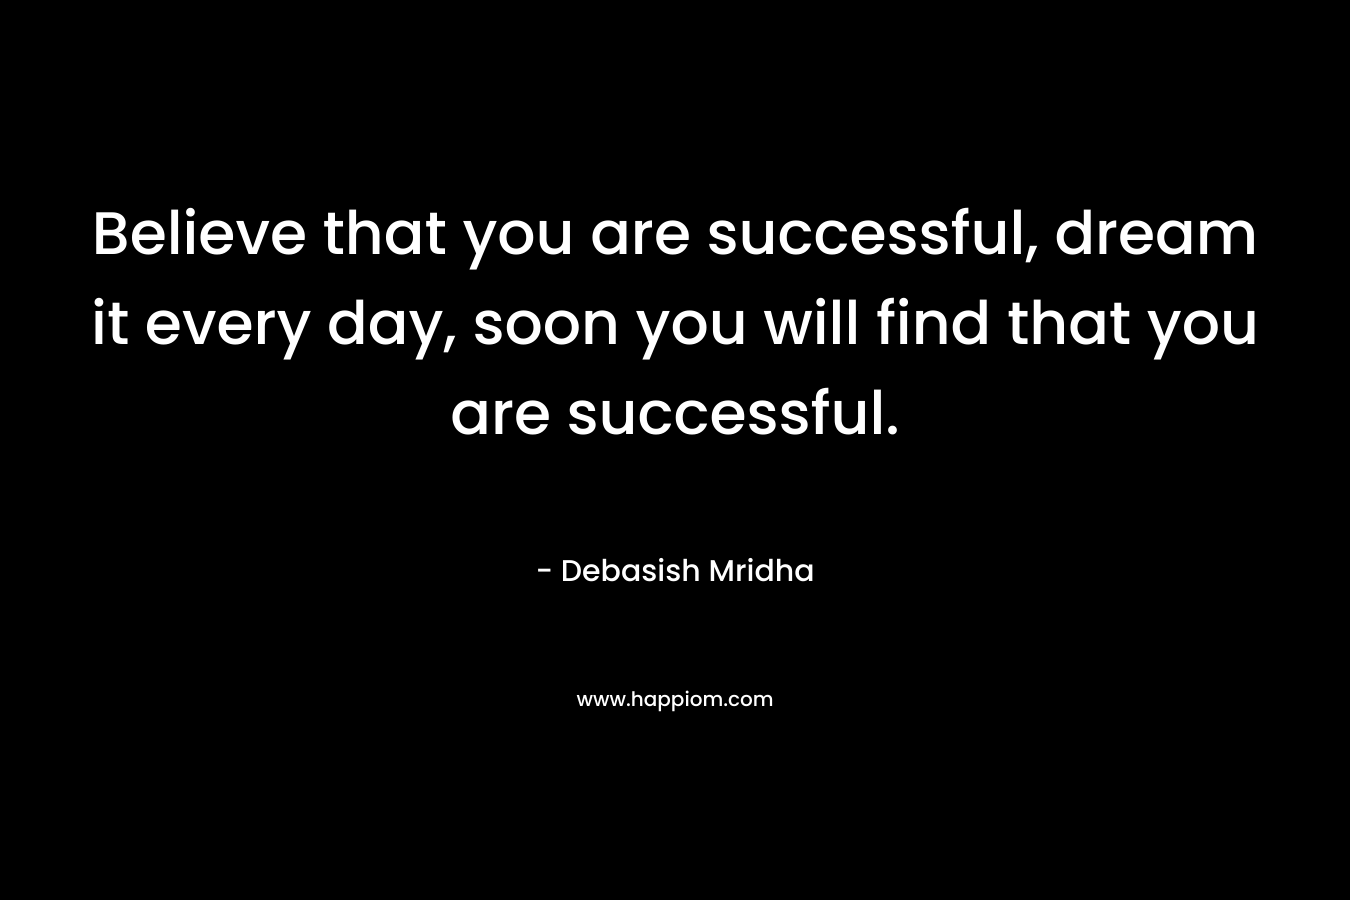 Believe that you are successful, dream it every day, soon you will find that you are successful.